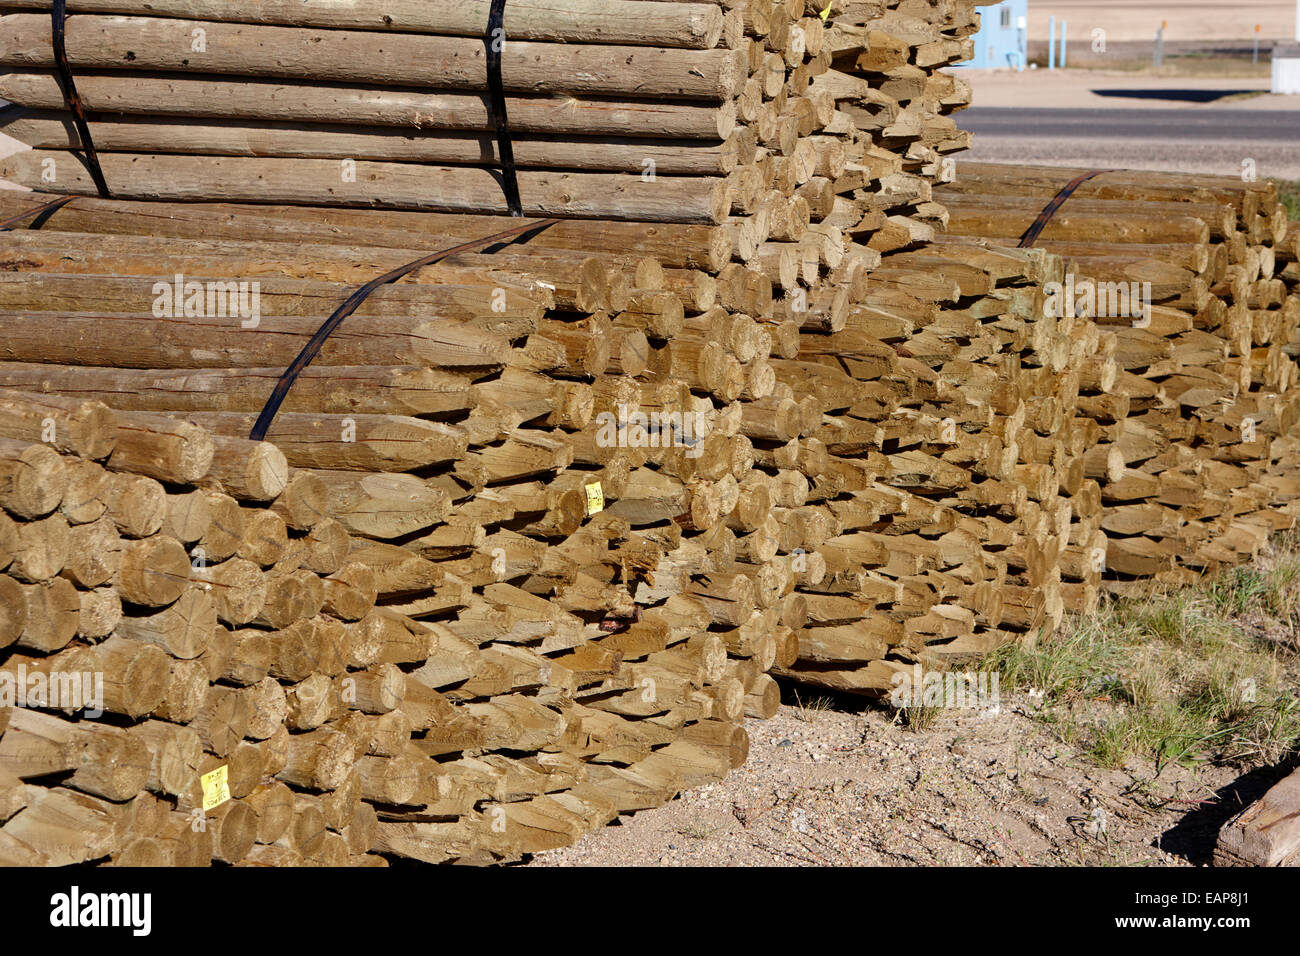 piles of wooden fencing poles at a mill Saskatchewan Canada Stock Photo